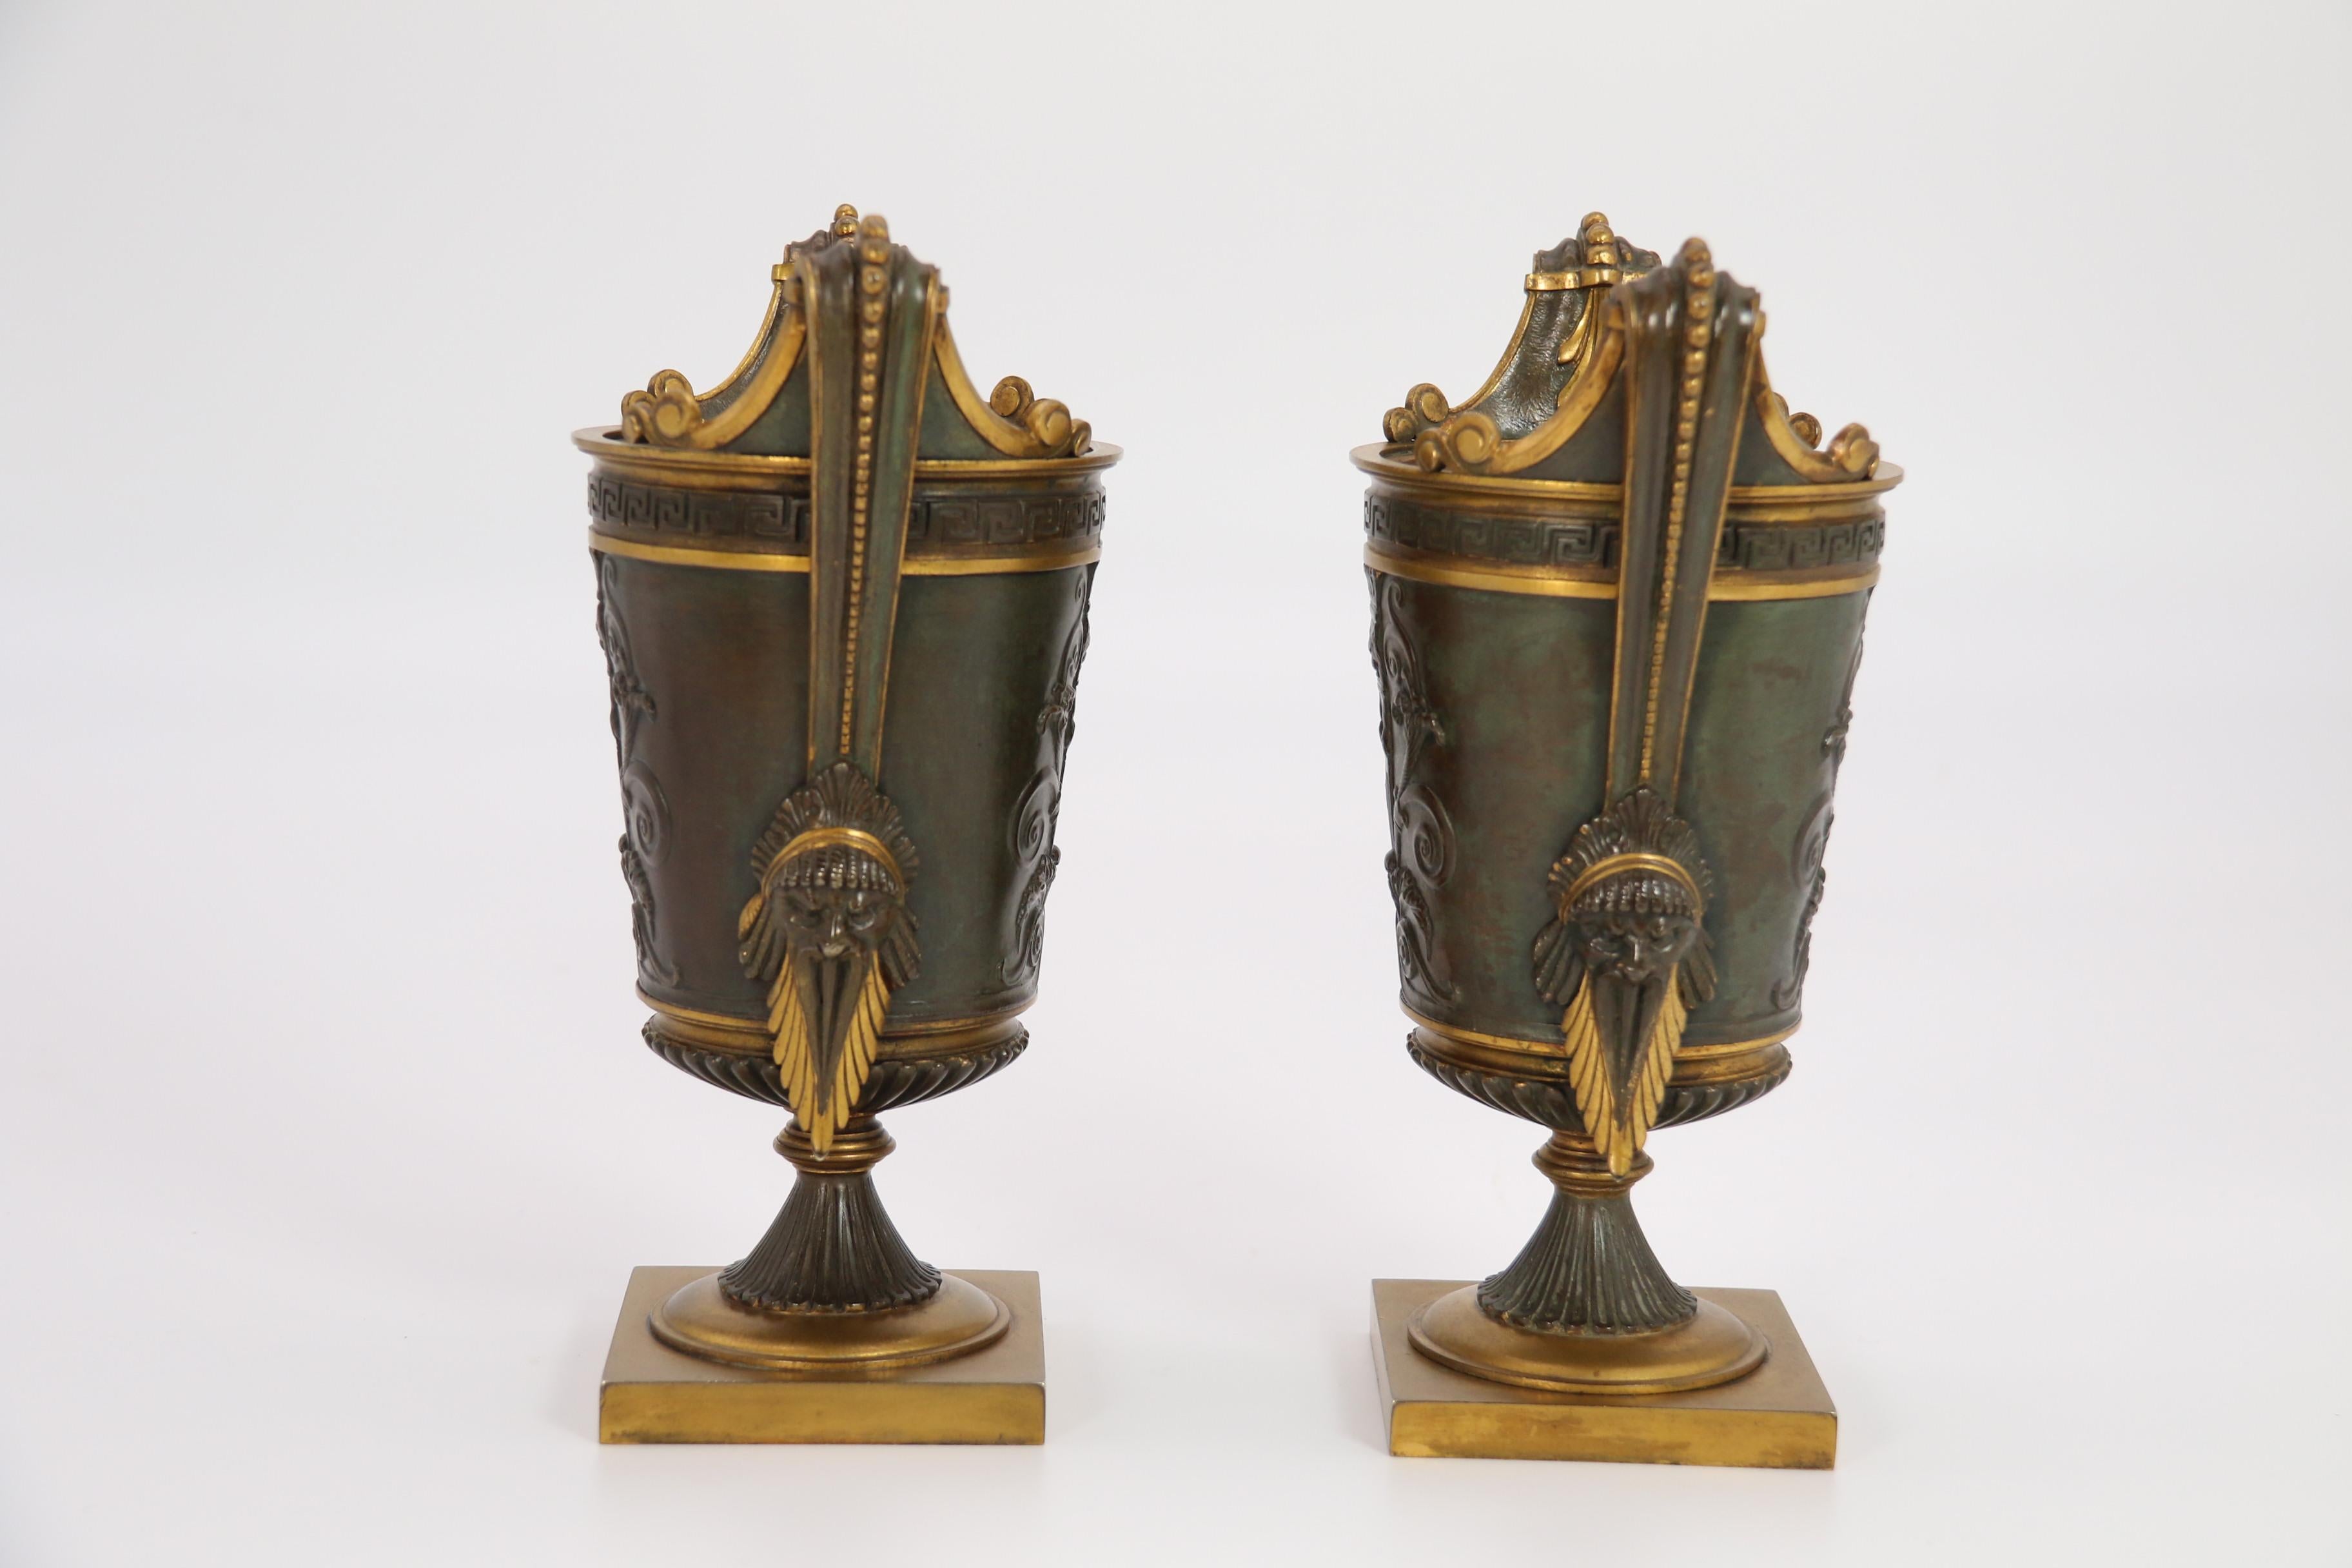 Empire period bronze and ormolu Grecian style pair of classical urns, circa 1830 In Good Condition For Sale In Central England, GB